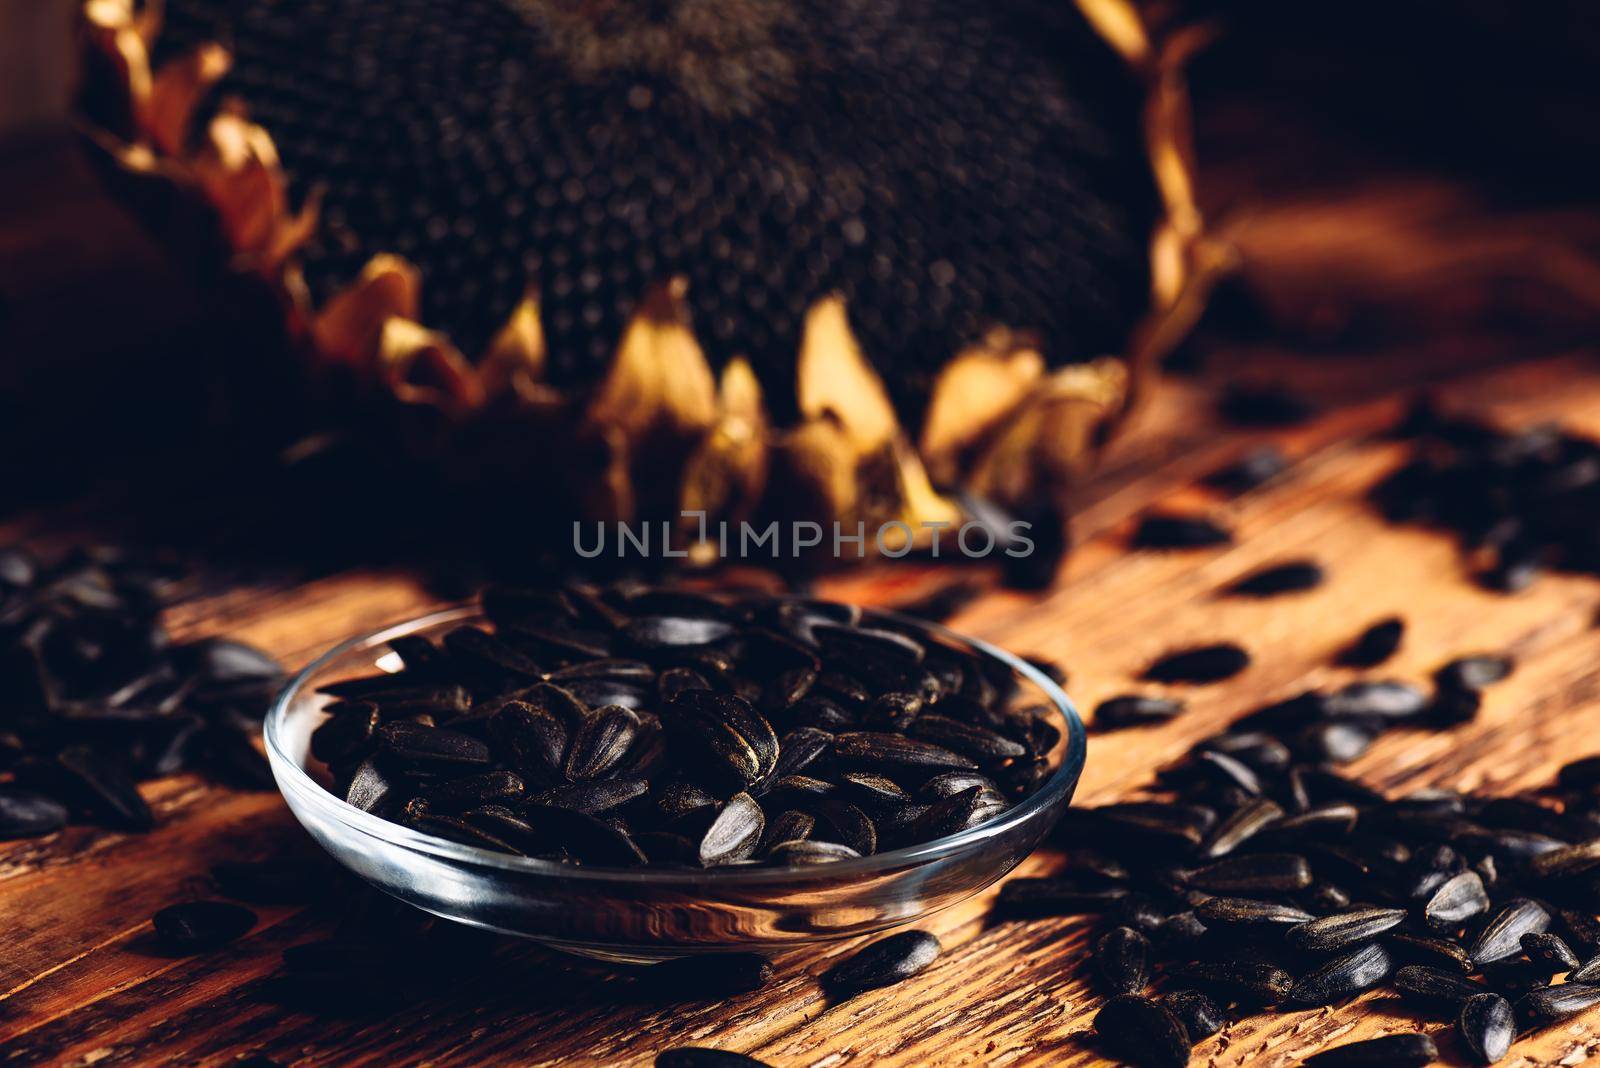 Roasted seeds on the glass saucer and dried sunflower over old wooden surface